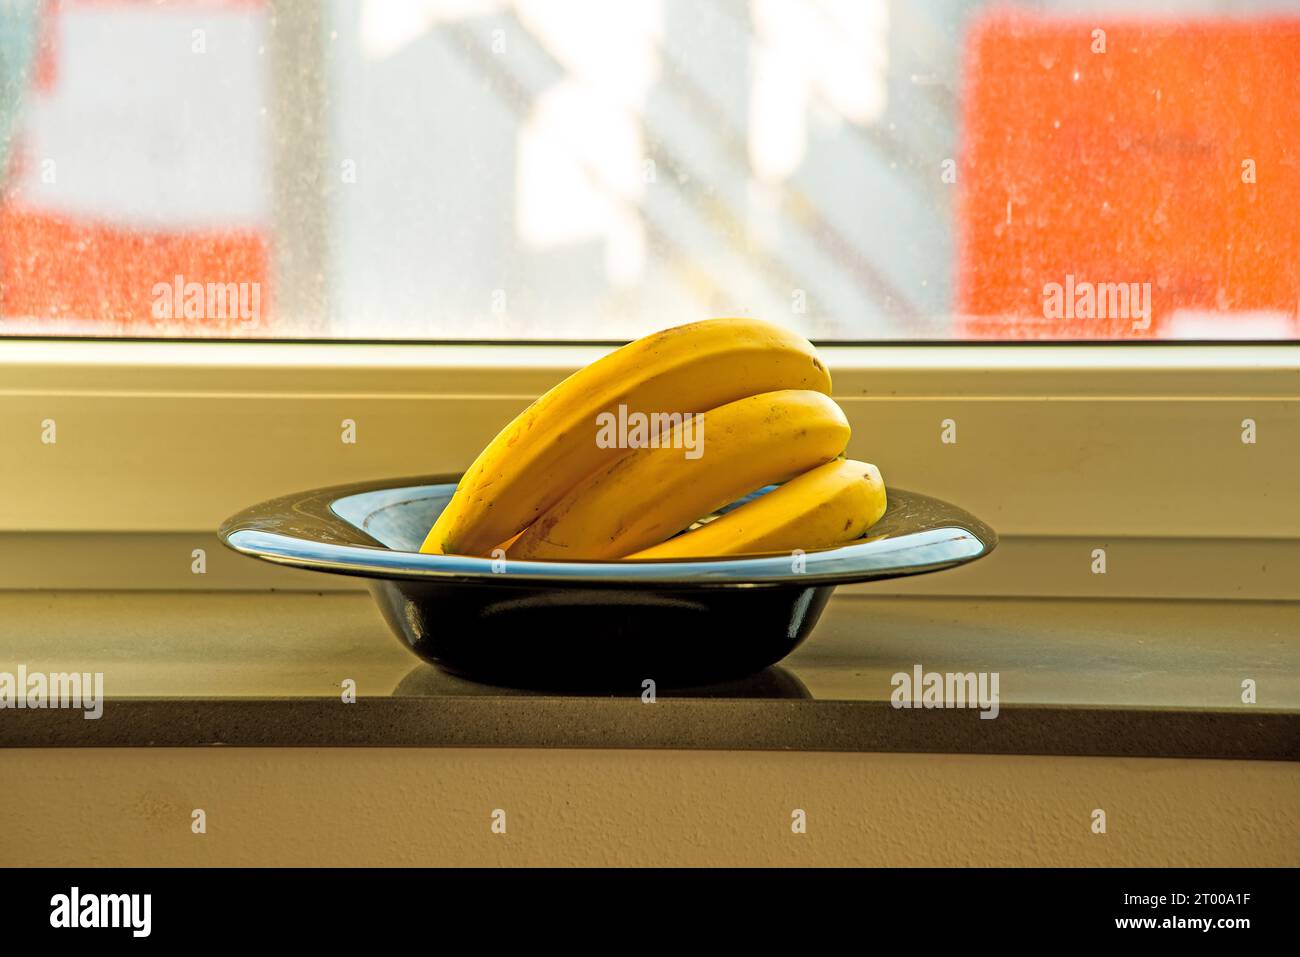 ripe bananas in a black fruit bowl on a window sills Stock Photo